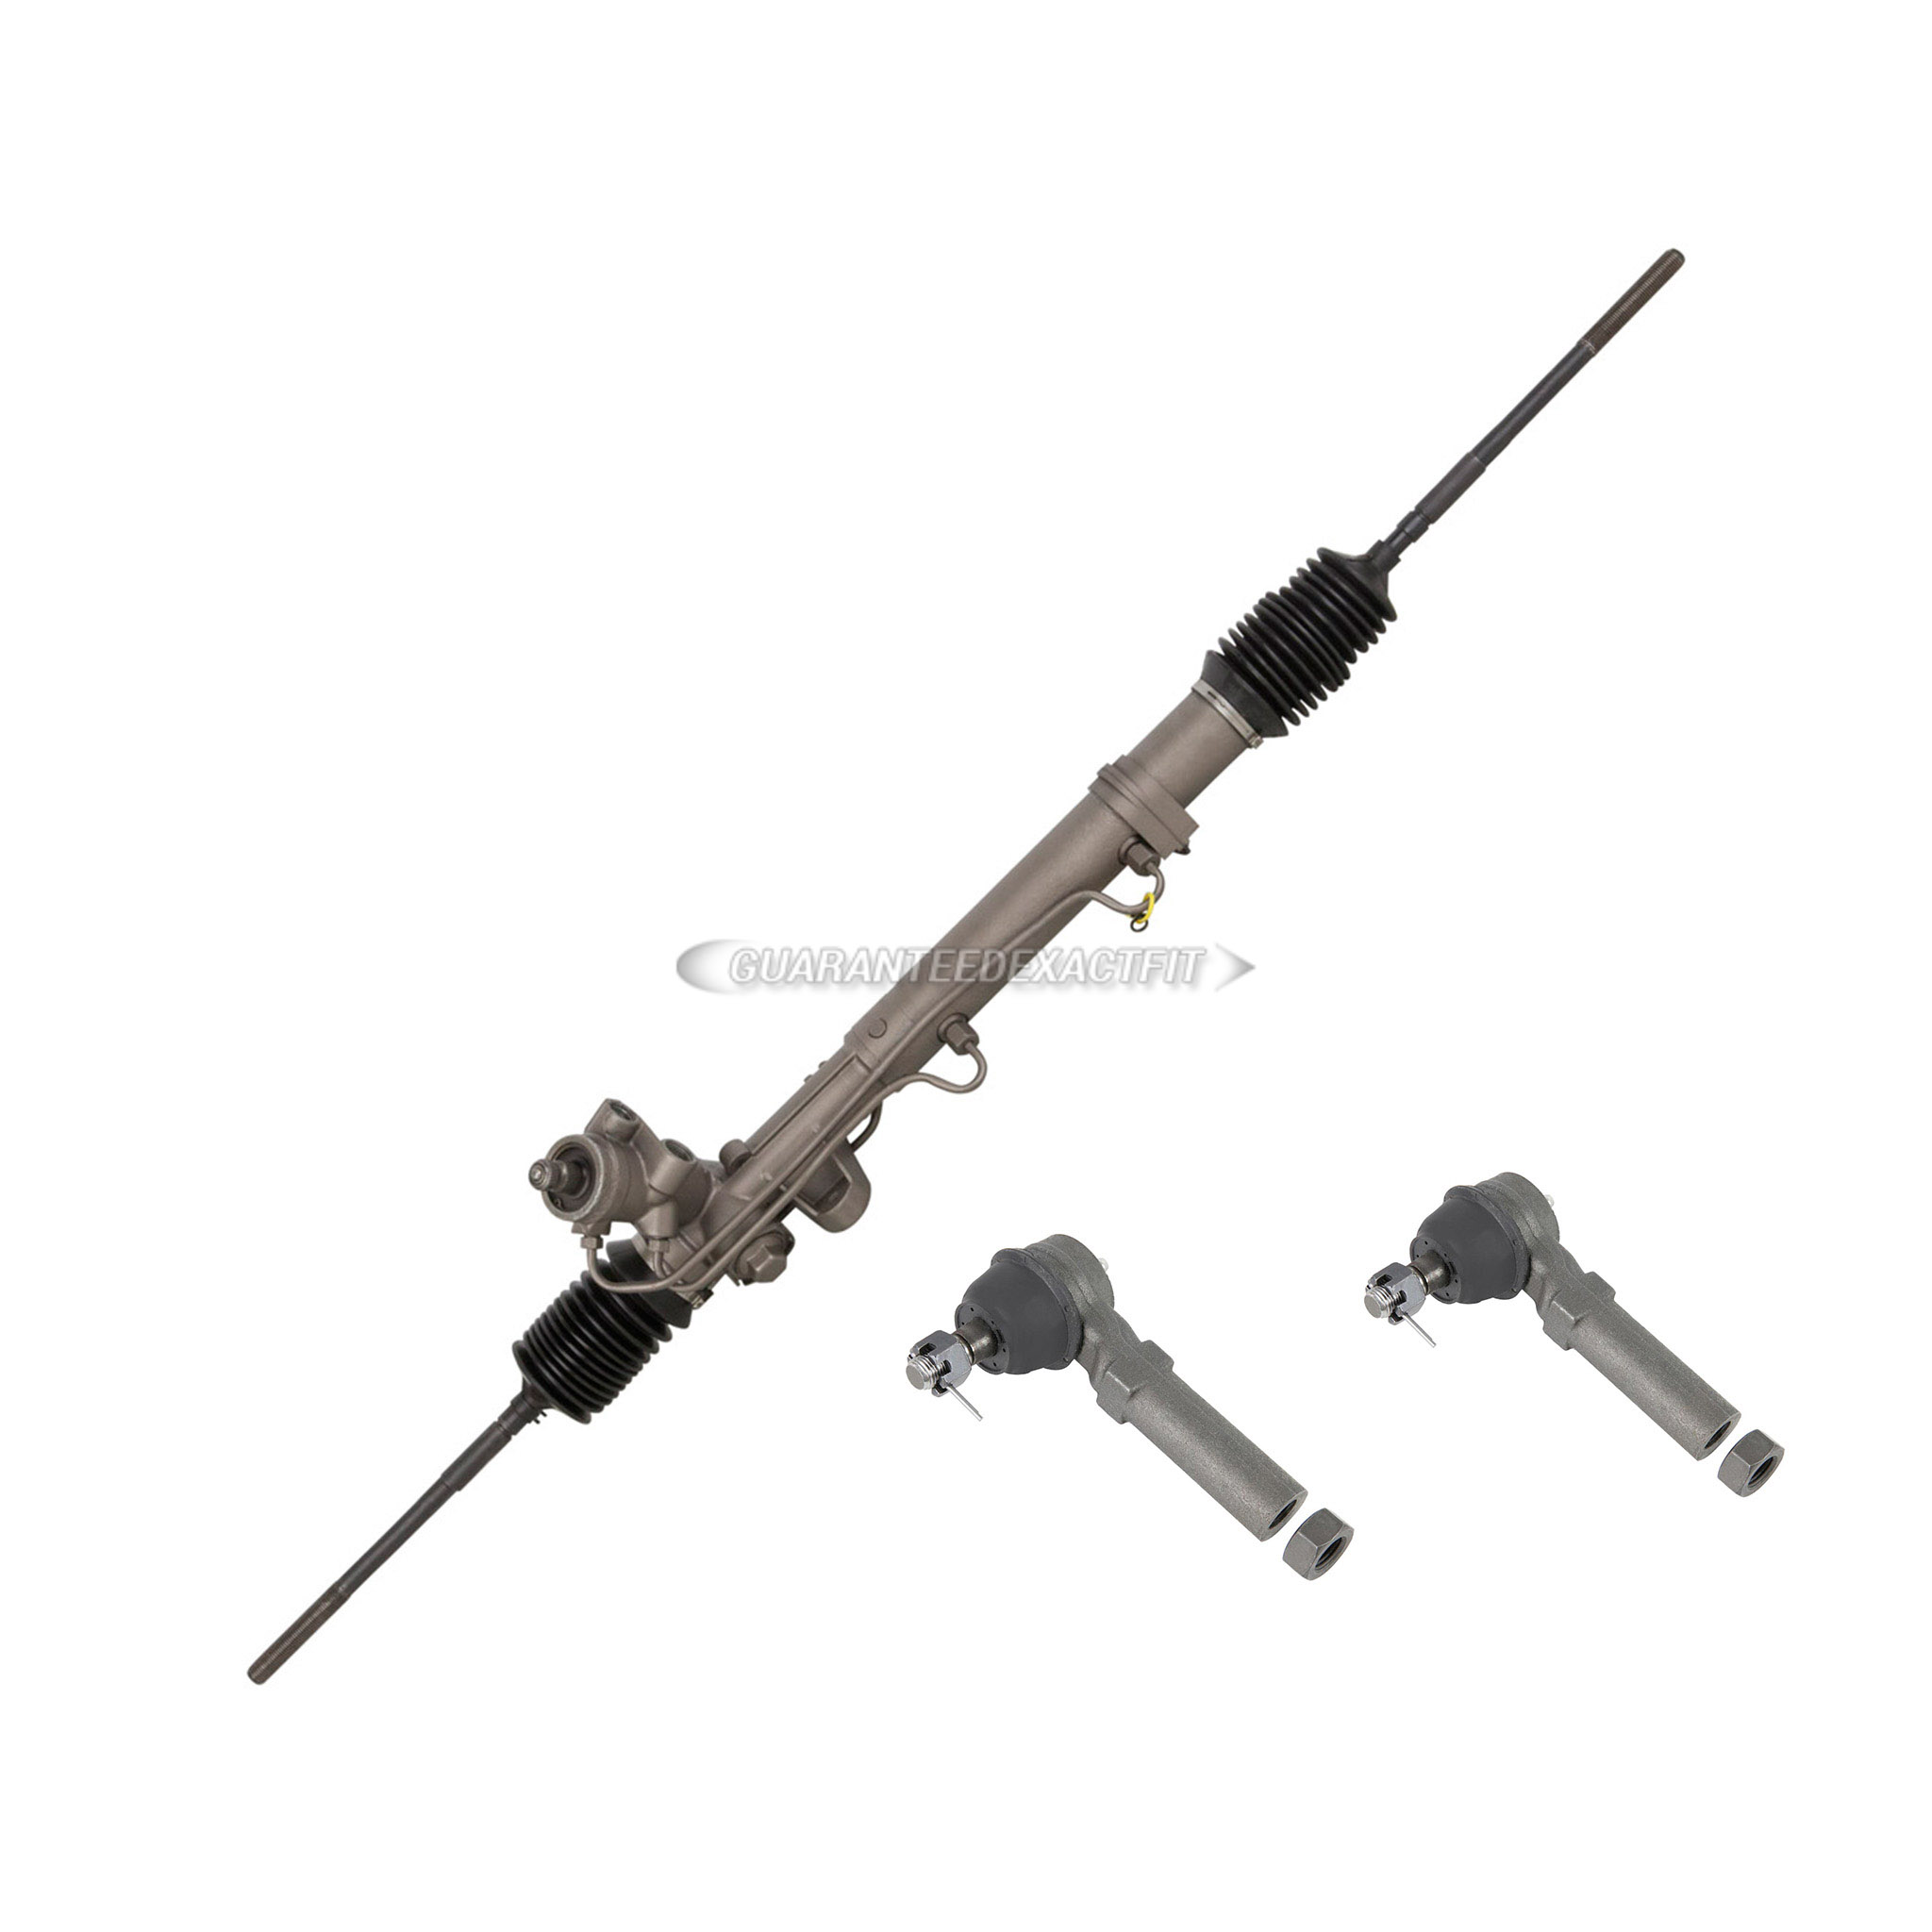  Dodge daytona rack and pinion and outer tie rod kit 